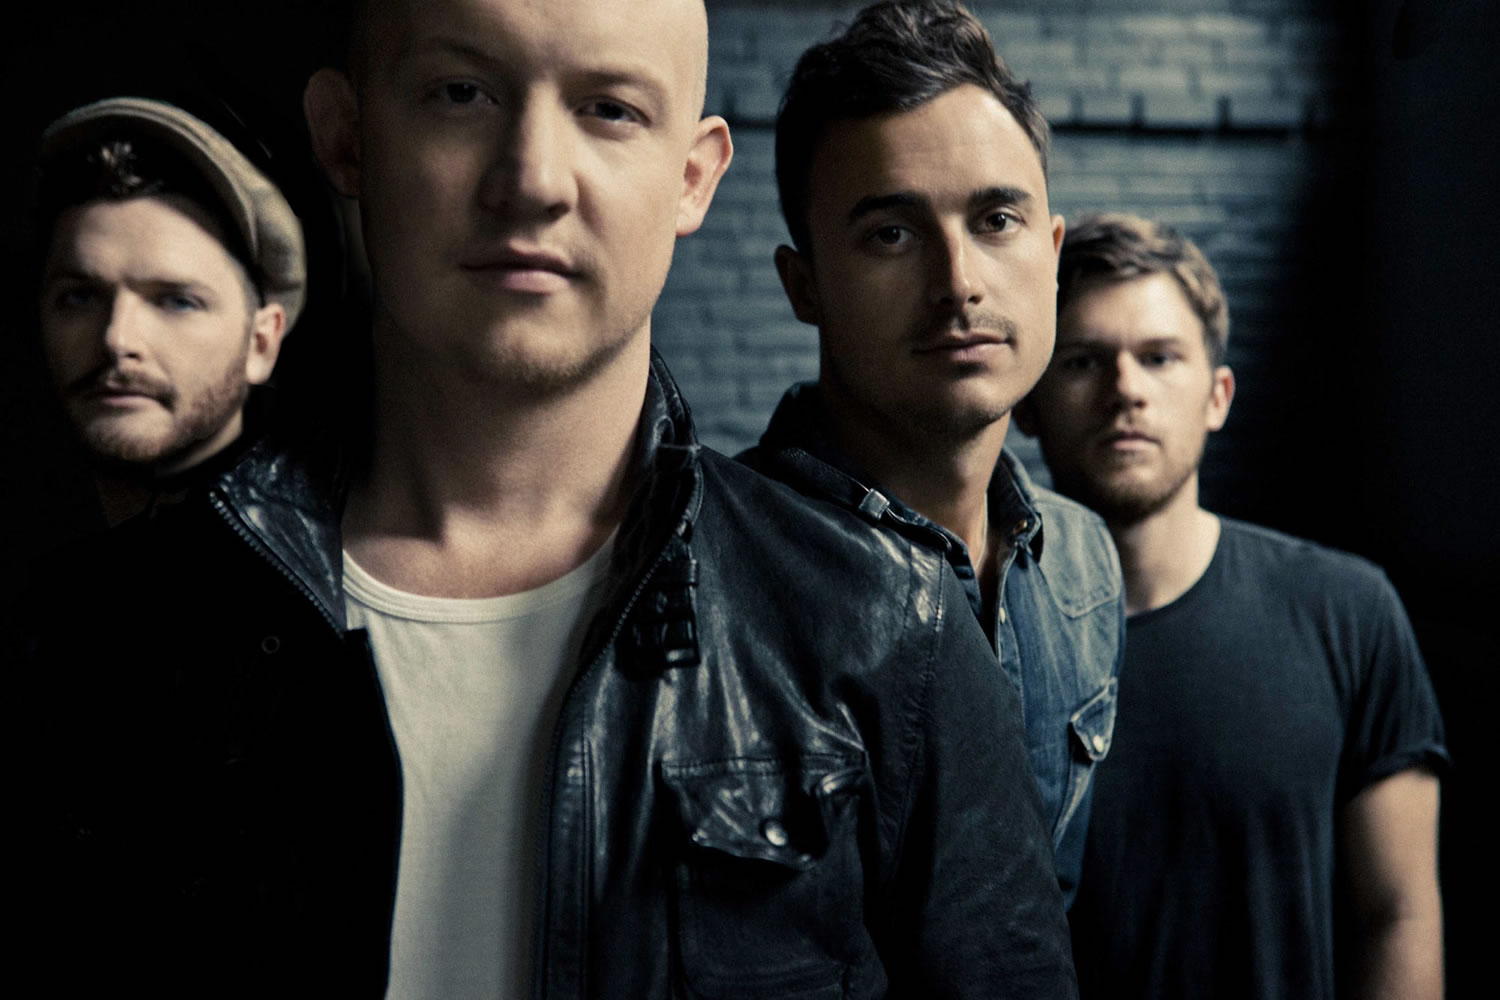 American piano rock band The Fray performs with Kelly Clarkson on Saturday, July 21 at the Sleep Country Amphitheater in Ridgefield.